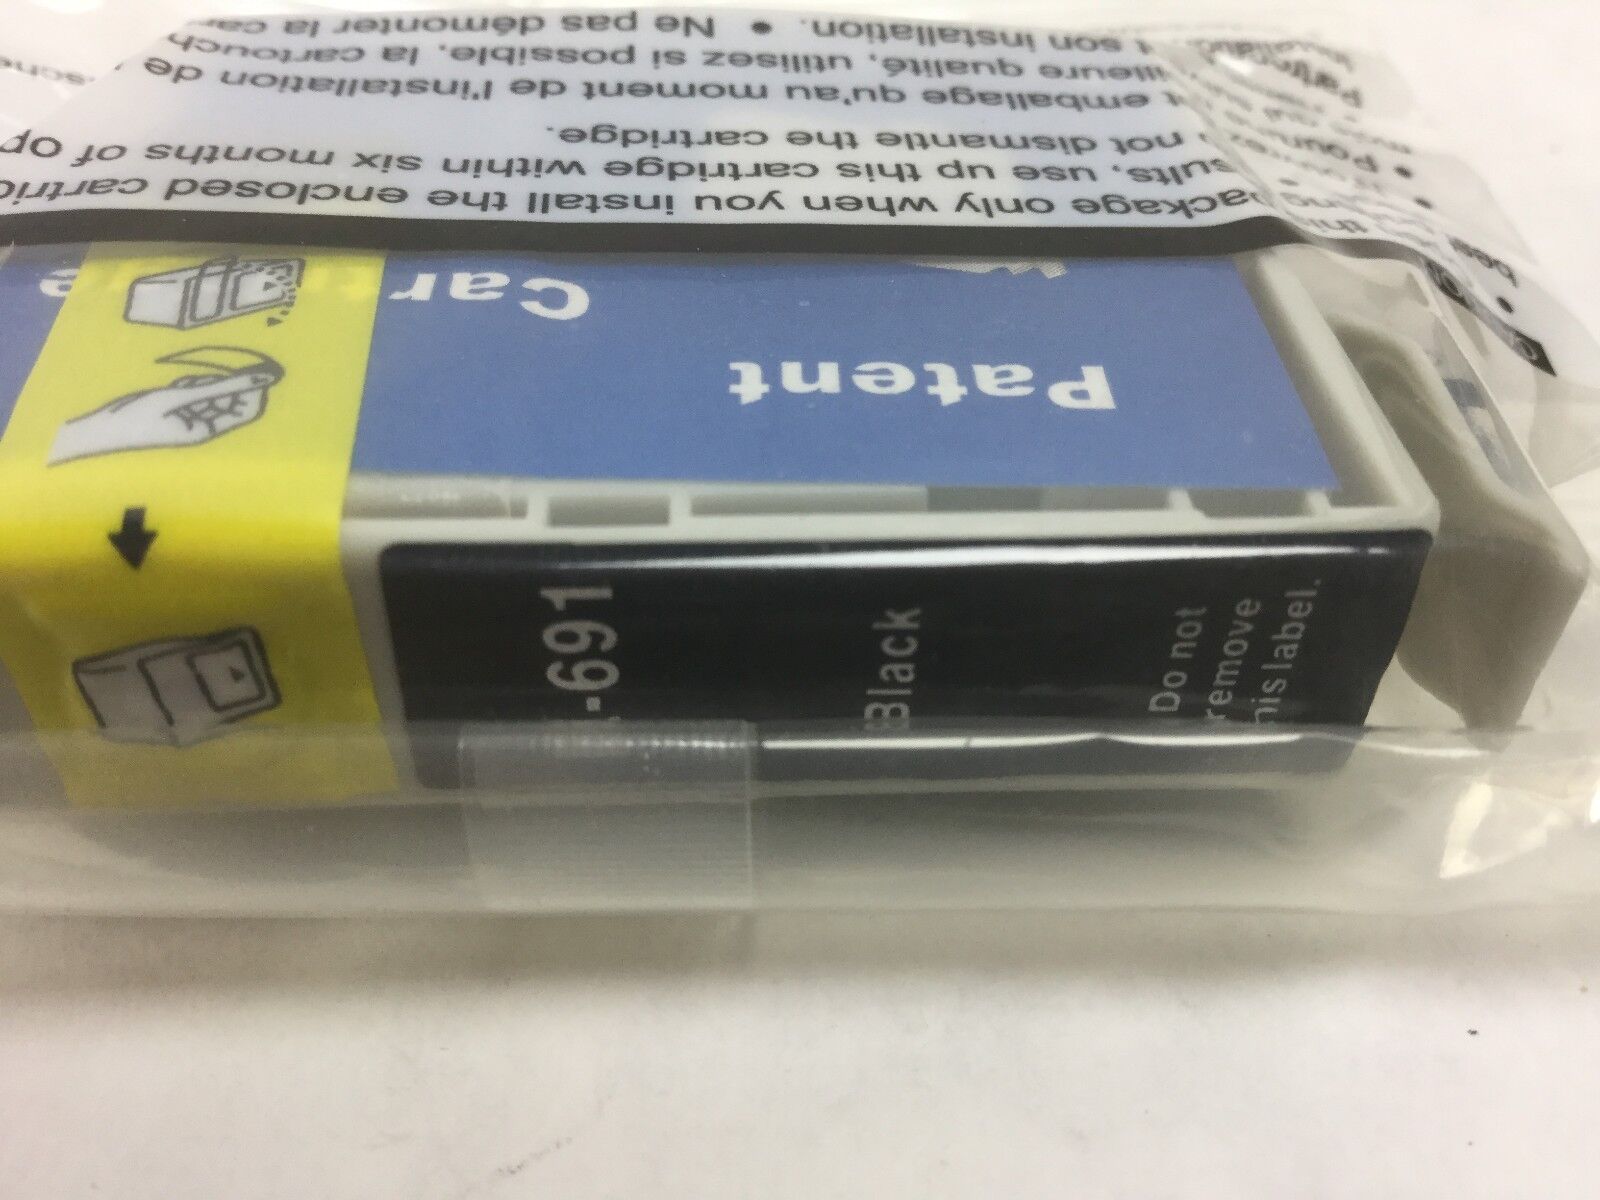 Ink Cartridge for Epson E-691 Black, New Factory Sealed